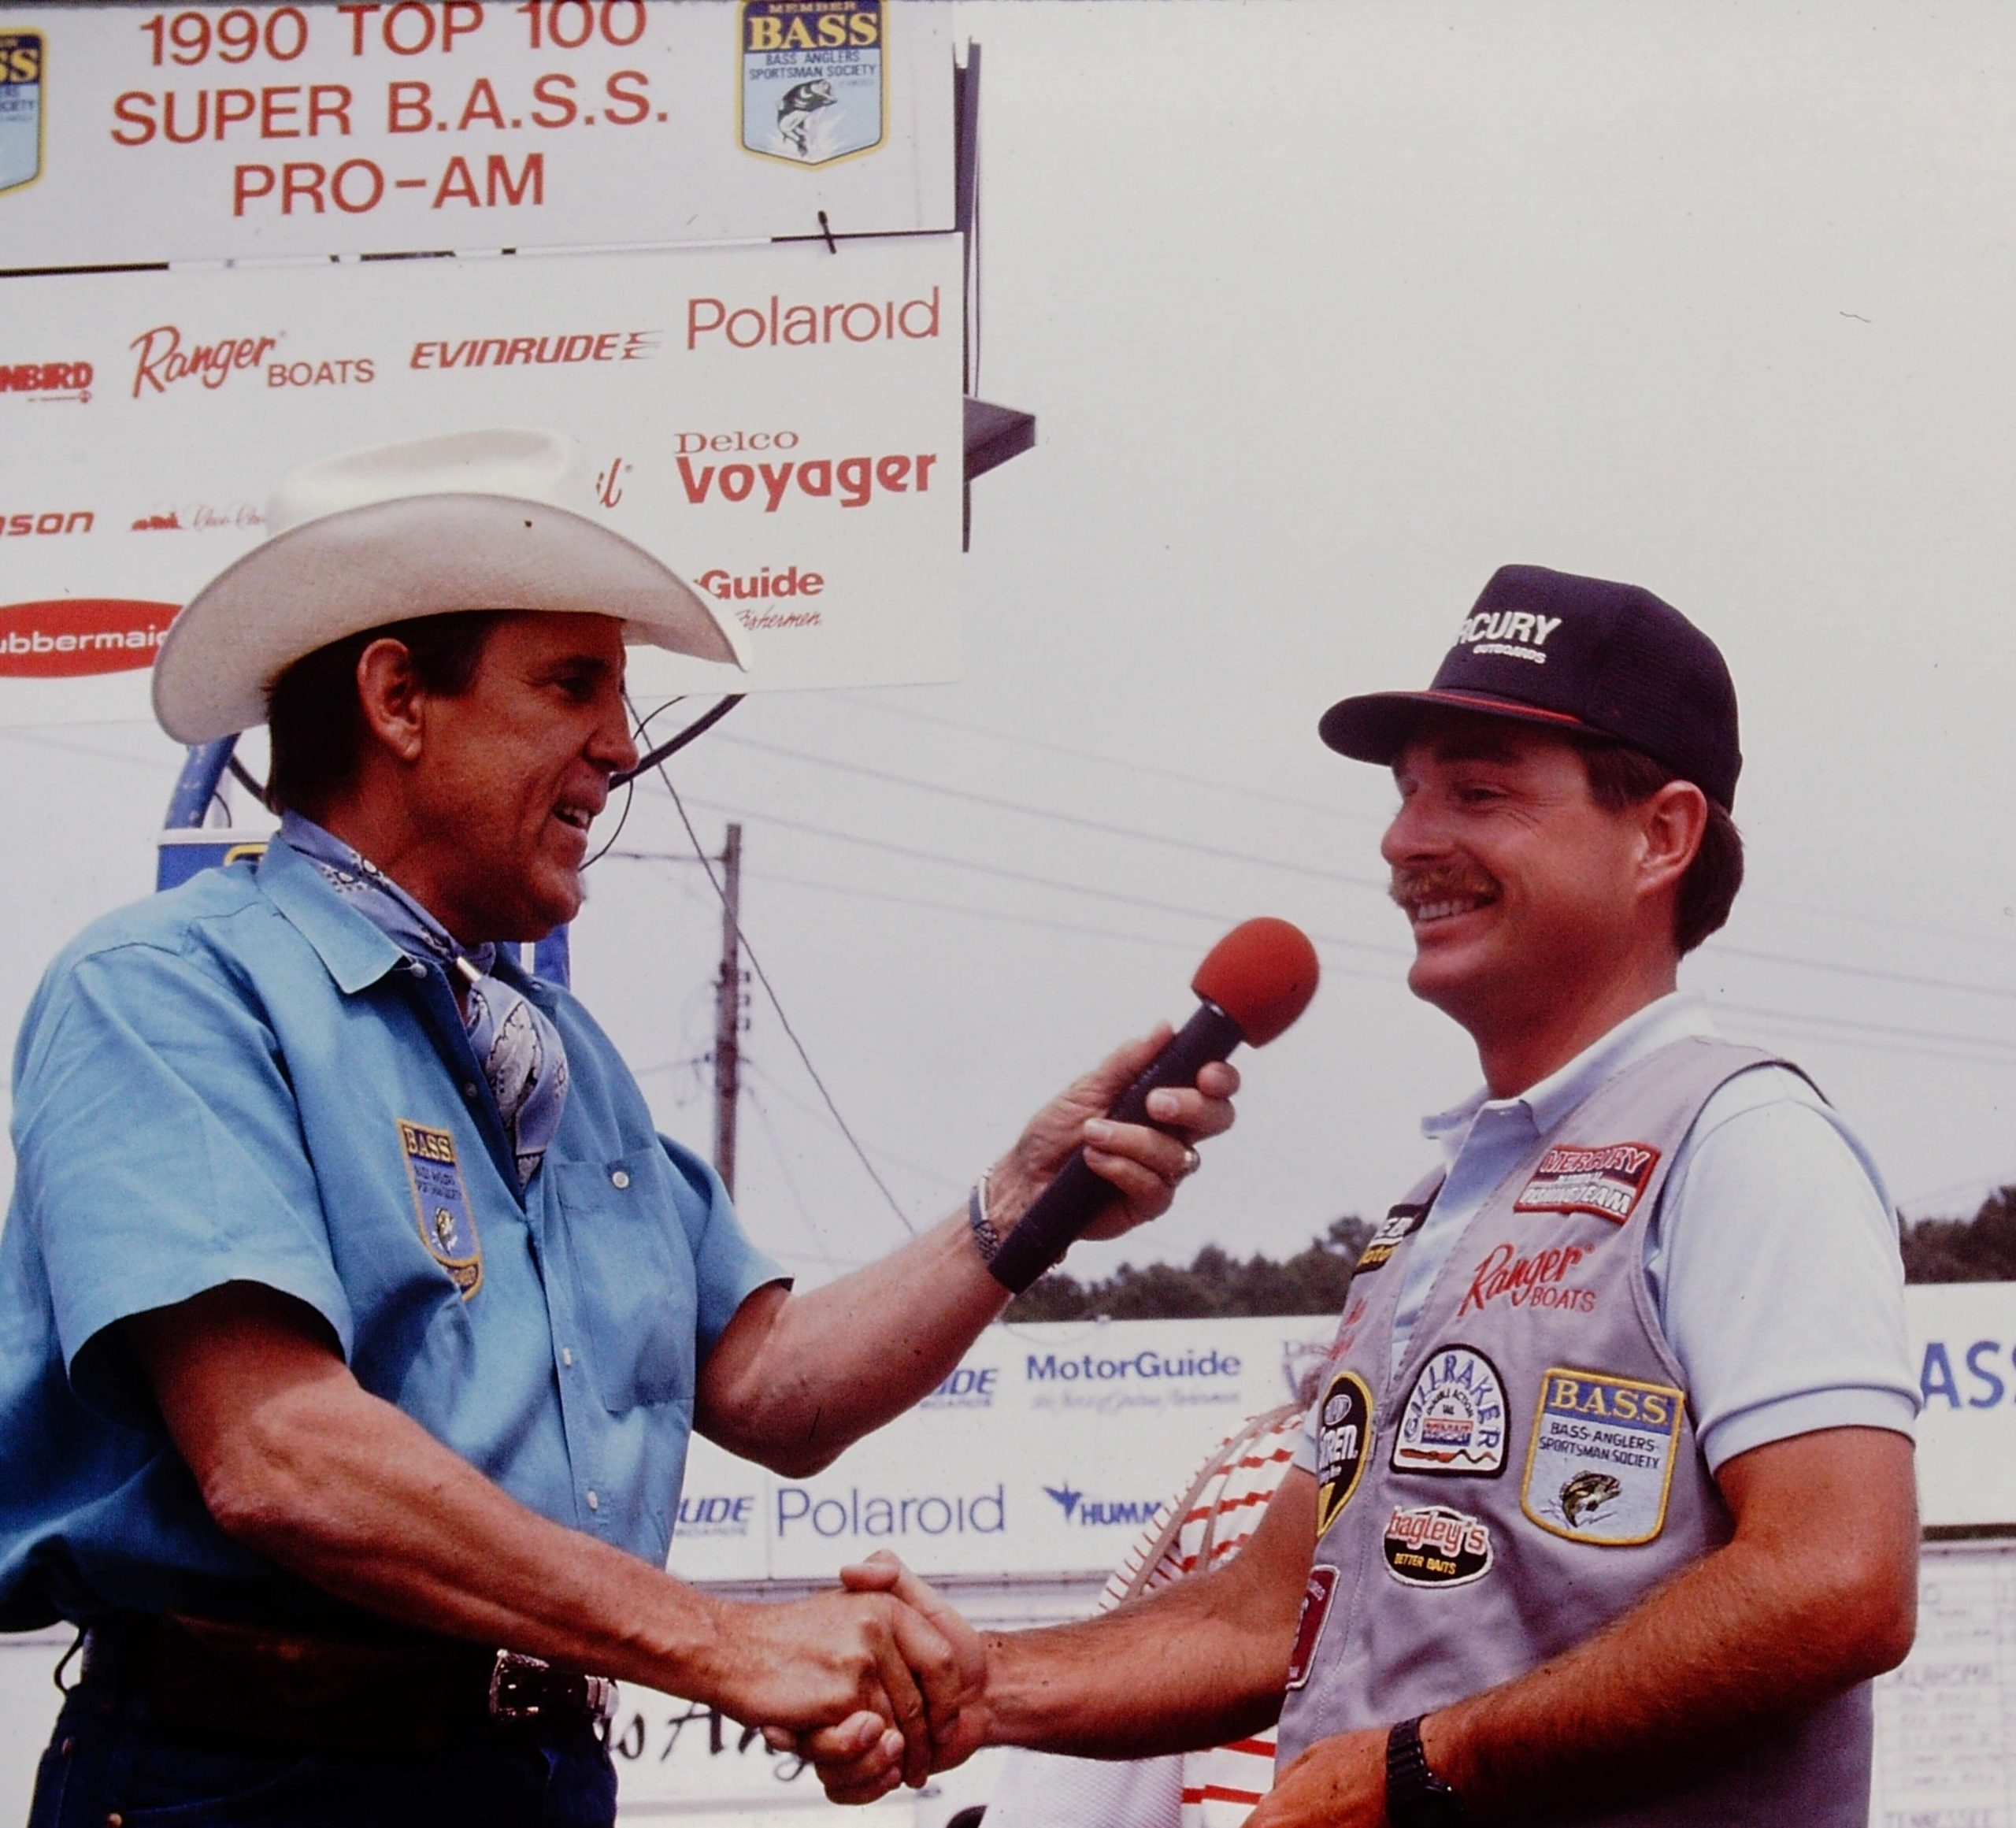 Shaw Grigsby, who is among the pros competing in BASSfest, finished in 53rd place with 30 pounds, 9 ounces. By the 1990 Chickamauga tournament, he had competed with B.A.S.S. consistently for four years and already had two wins under his belt.